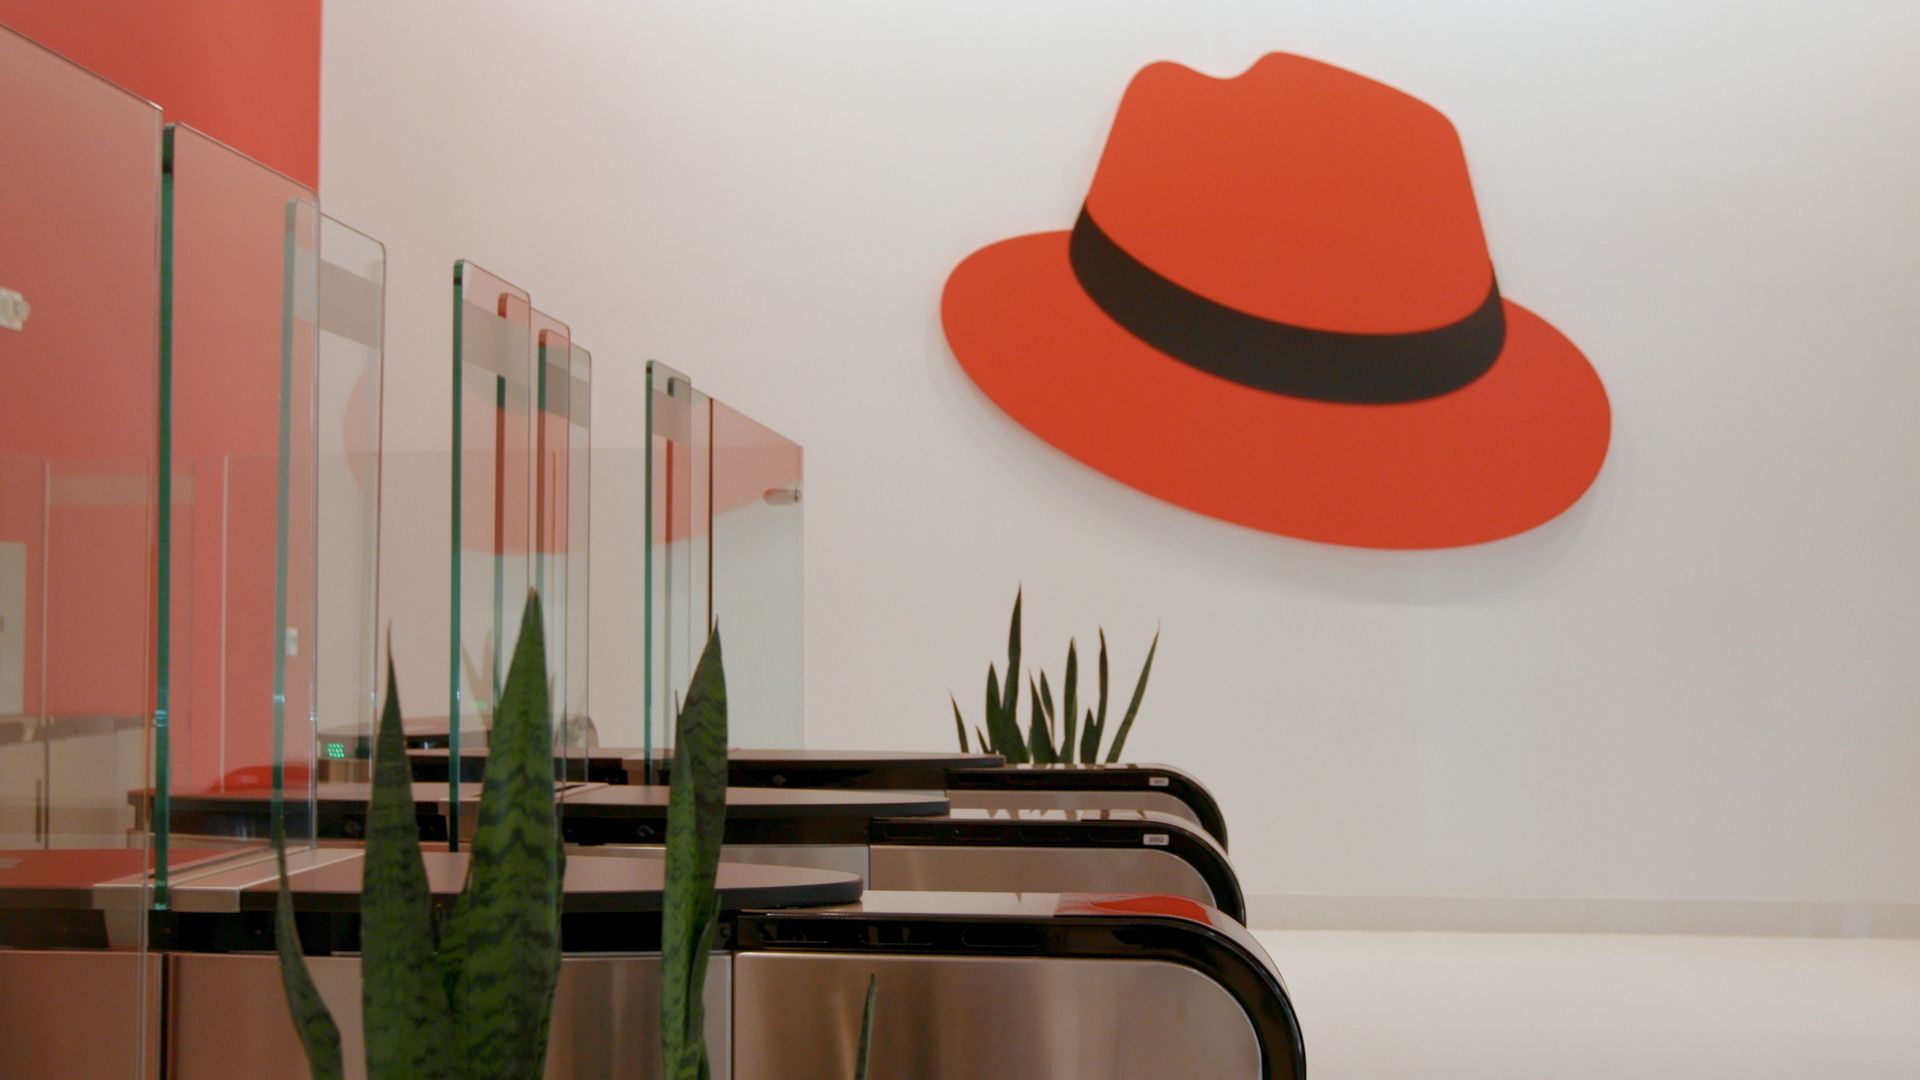 The lobby of Red Hat's headquarters building with badged entry gates and a big red hat.